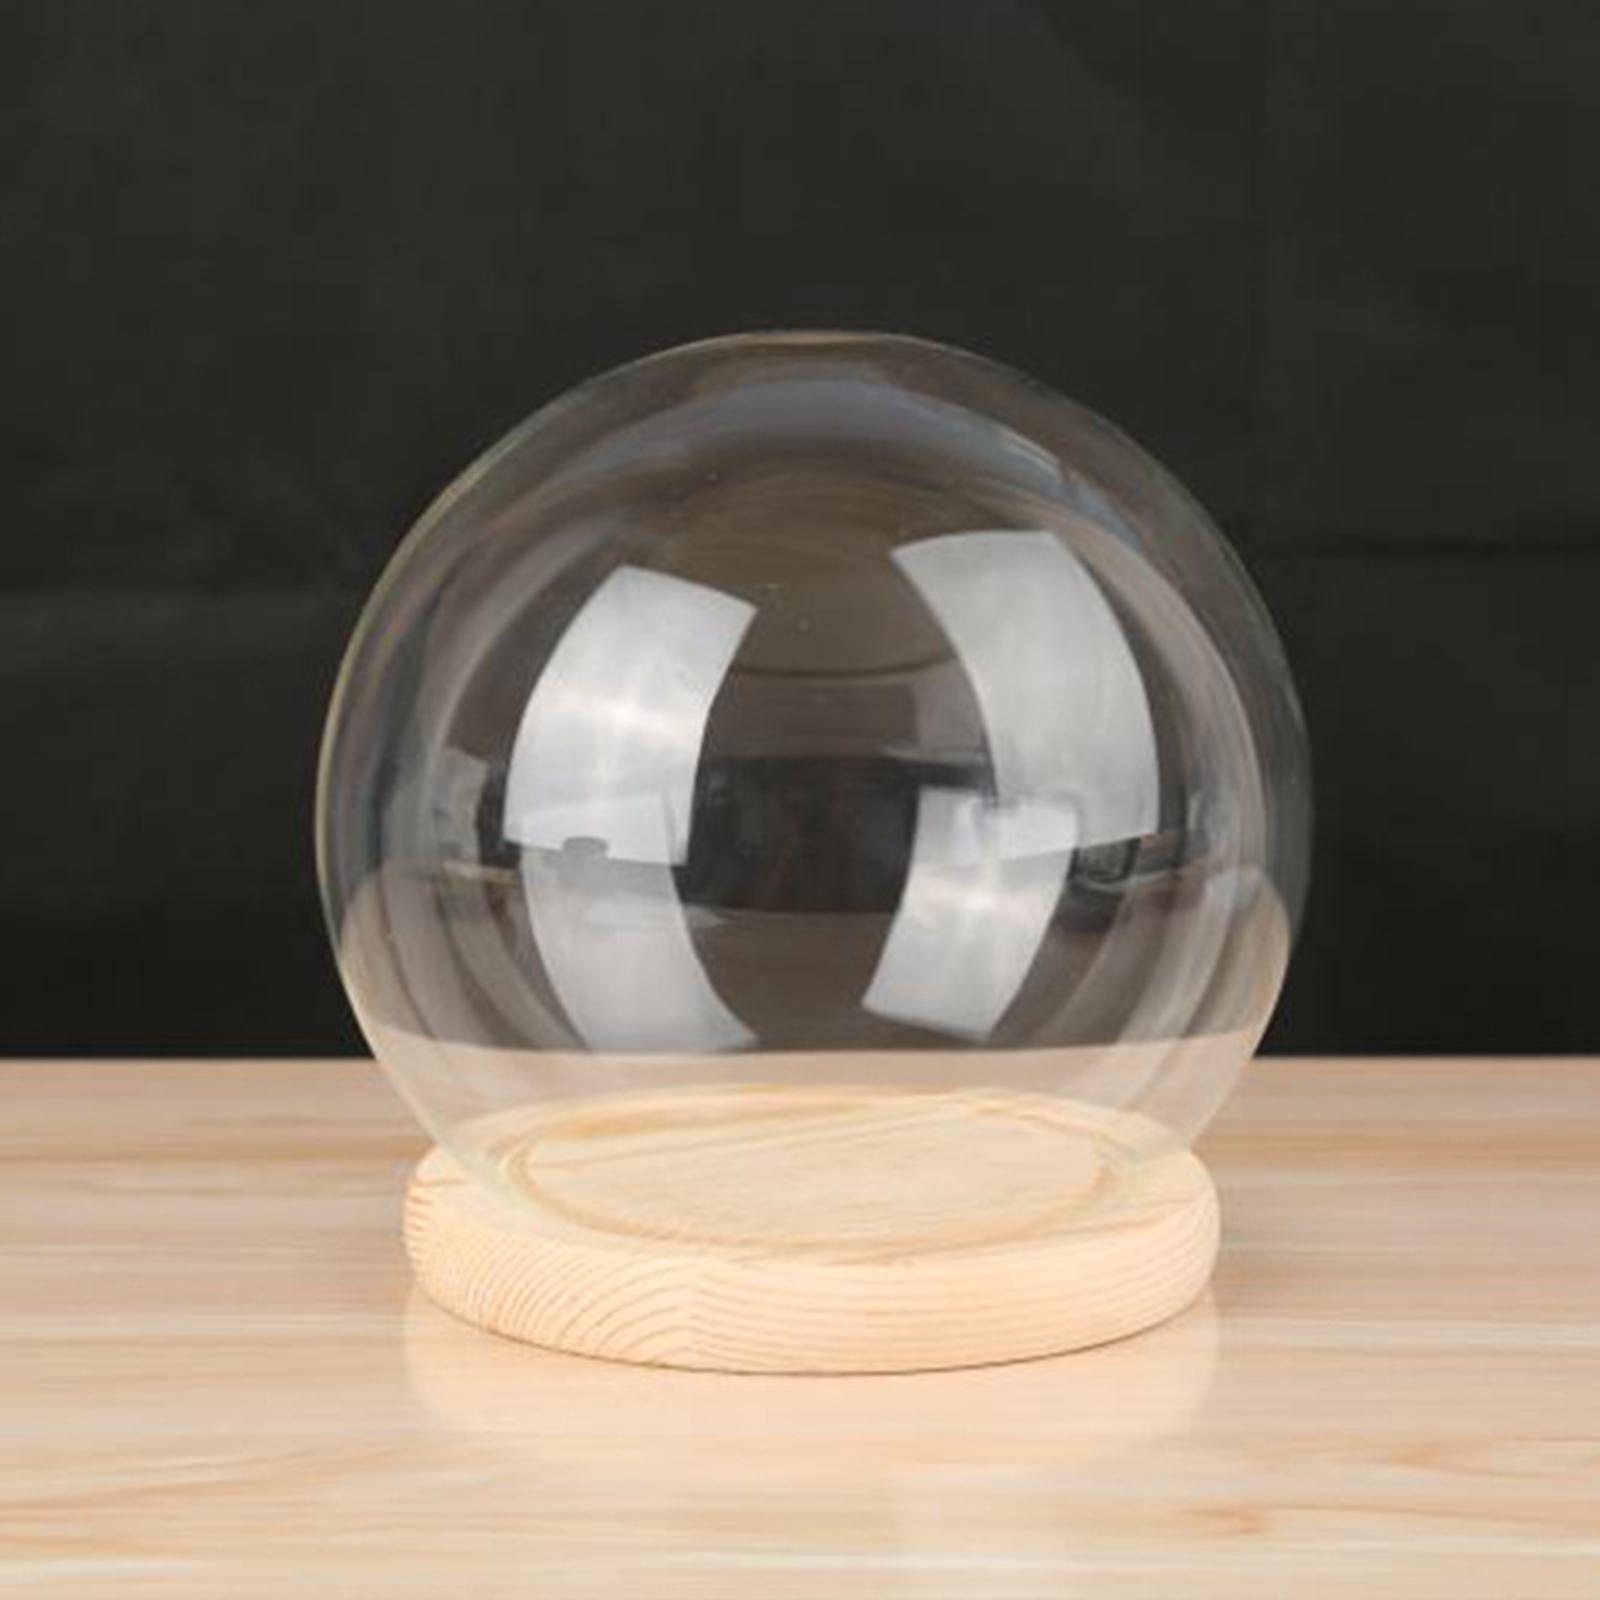 Display Dome with Base Transparent Showcase Glass Cover Container Glass Dome 12cm Wood Base